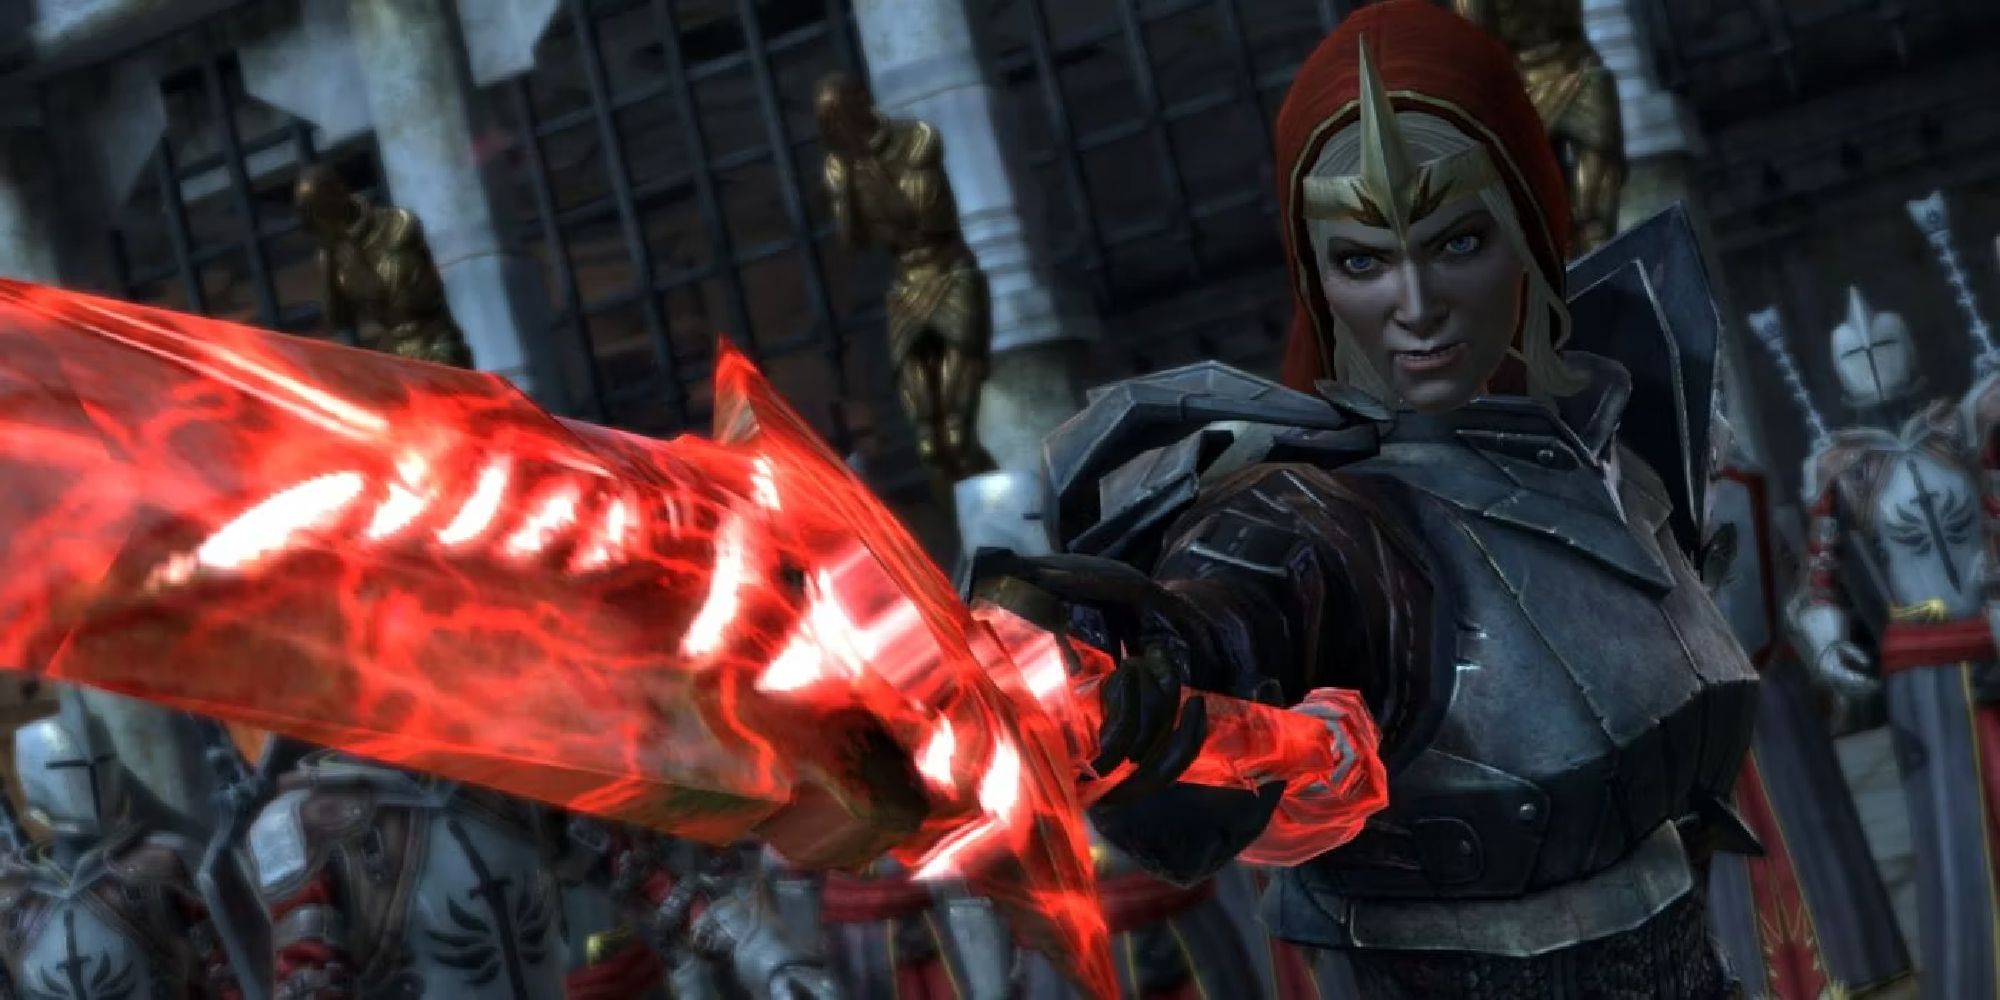 Meredith pointing her red lyrium infused blade forward in an agressive manner.